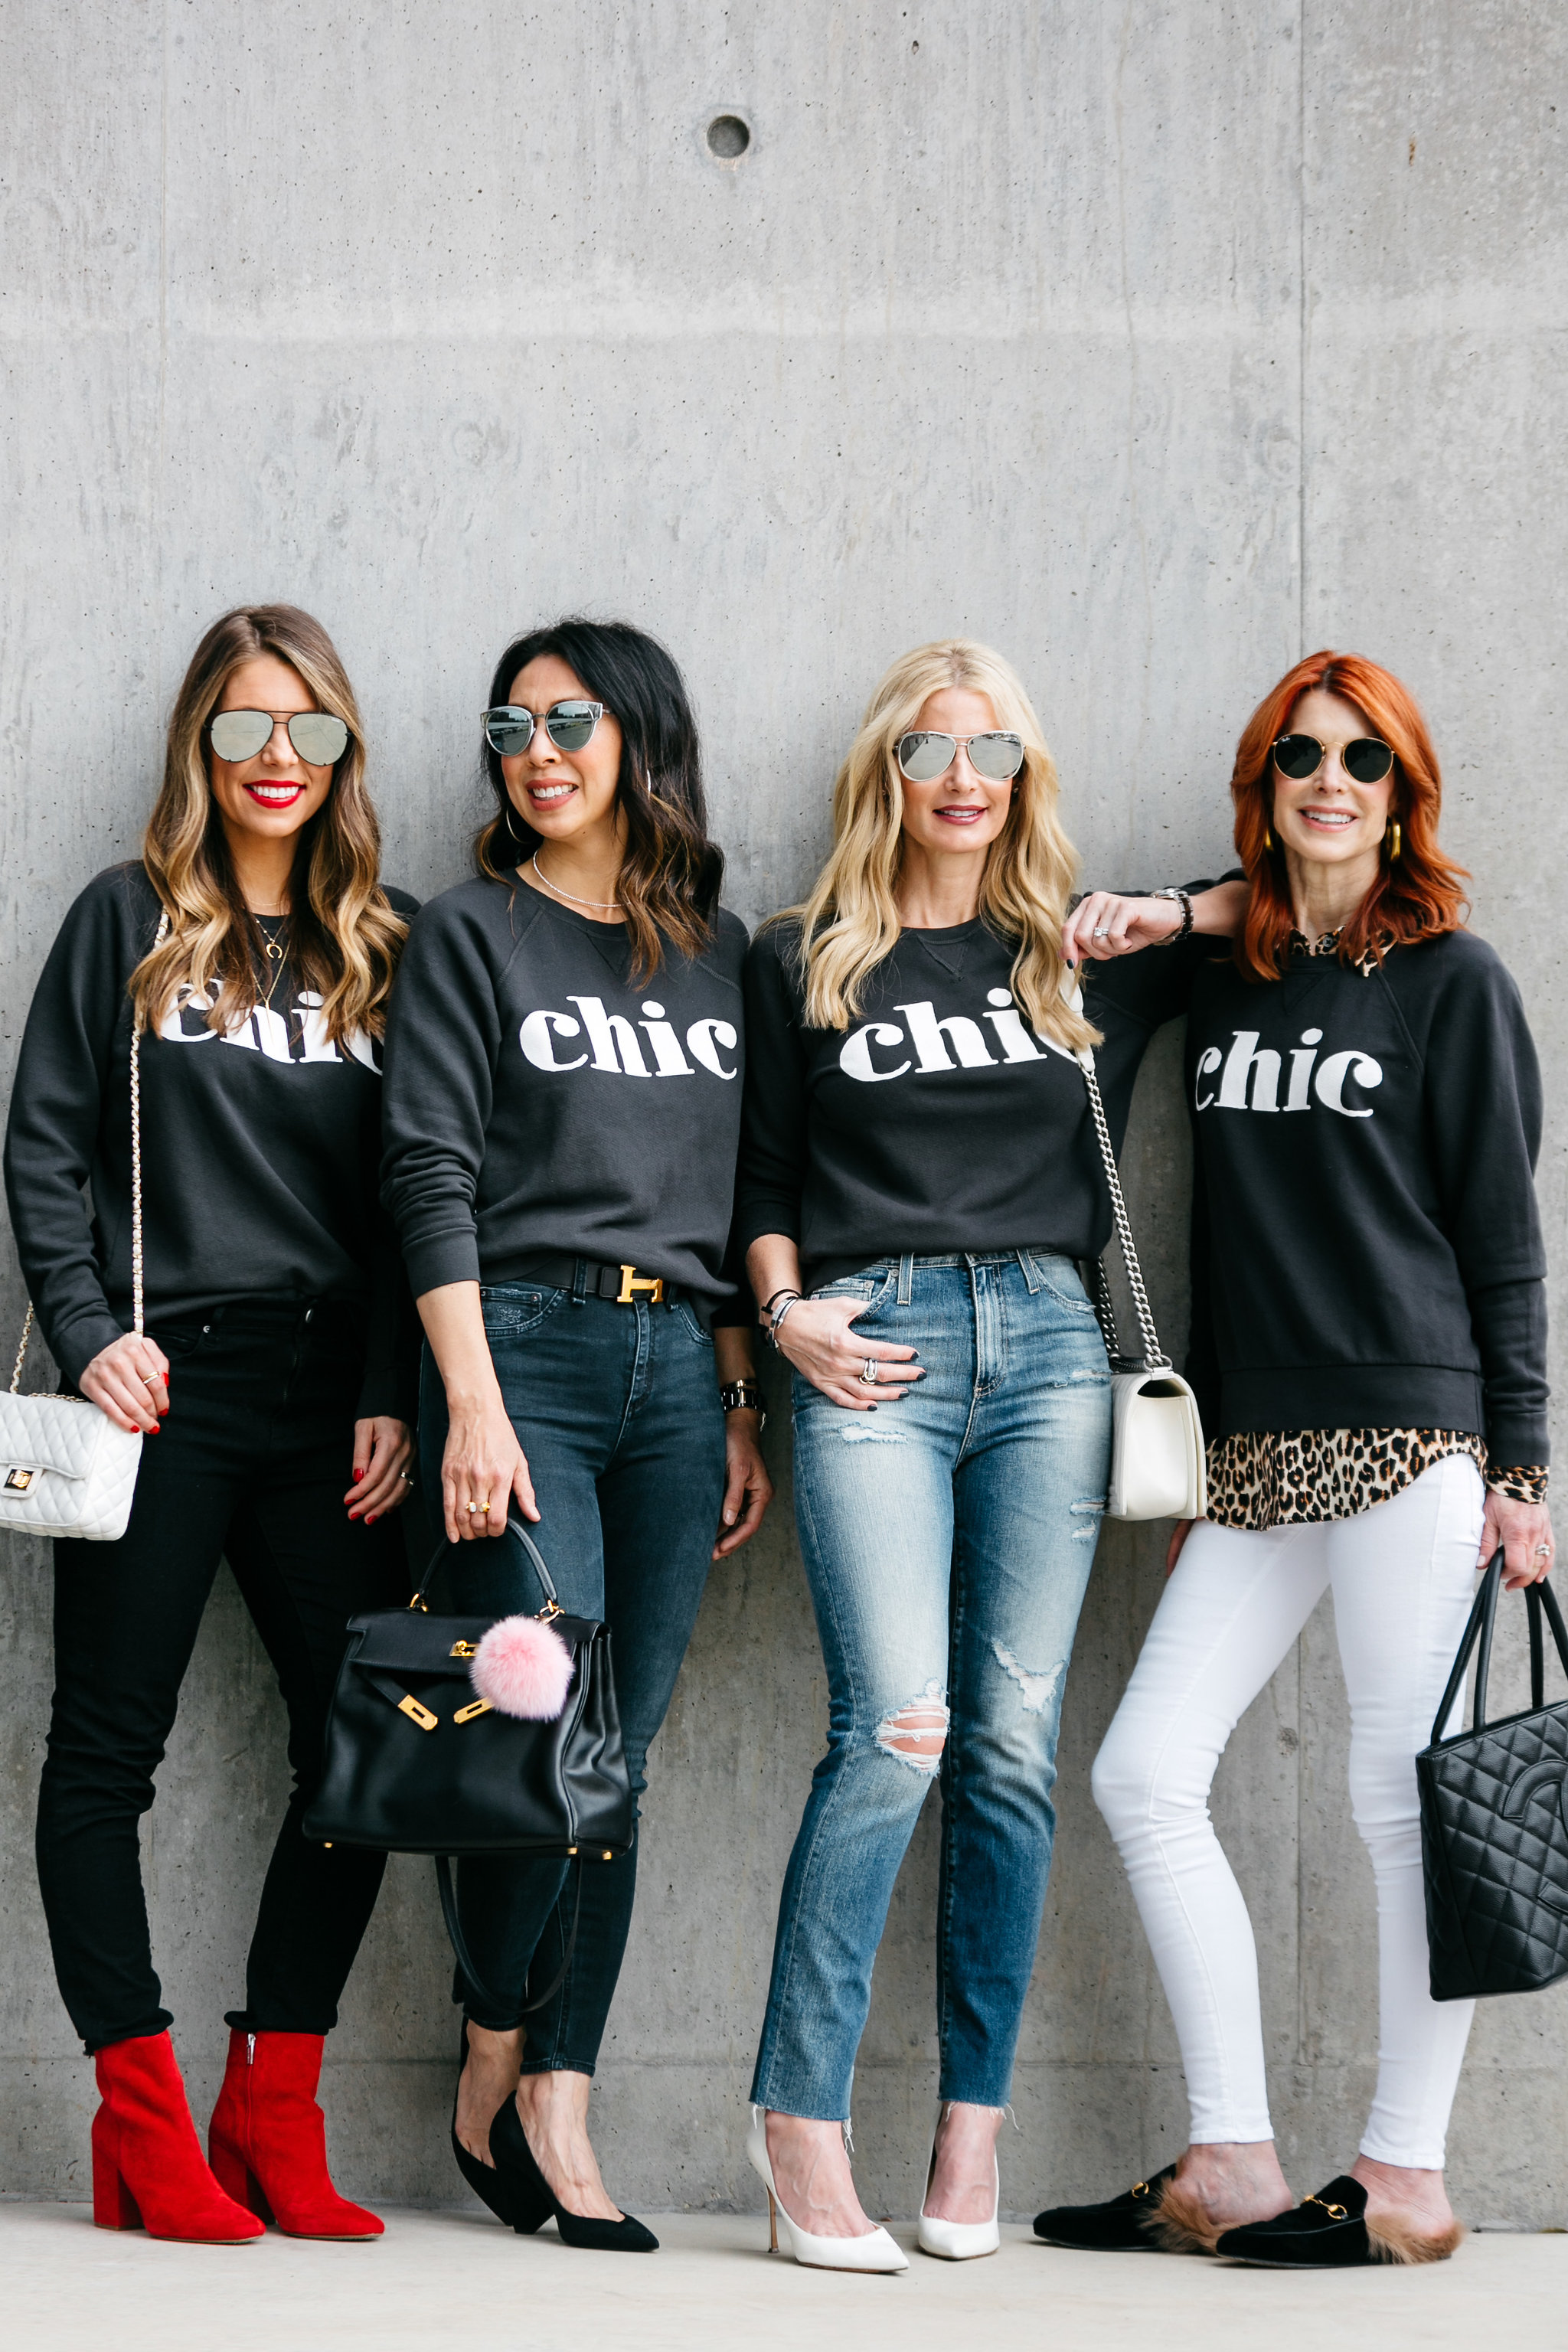 Chic is the Word today on the blog. The Chic at Every Age